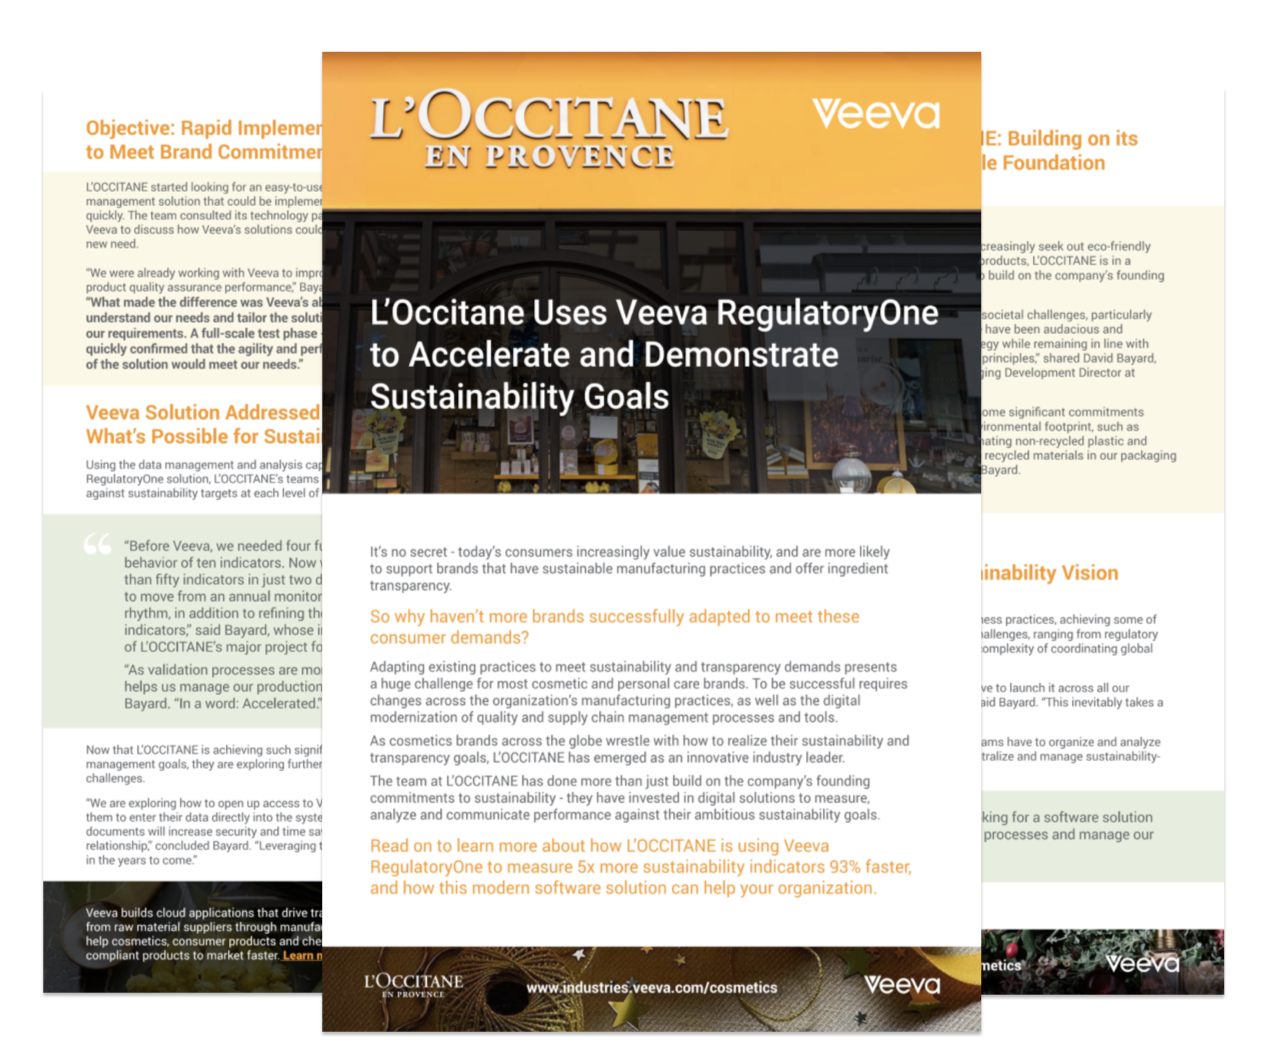 L’Occitane Uses Veeva RegulatoryOne to Accelerate and Demonstrate Sustainability Goals